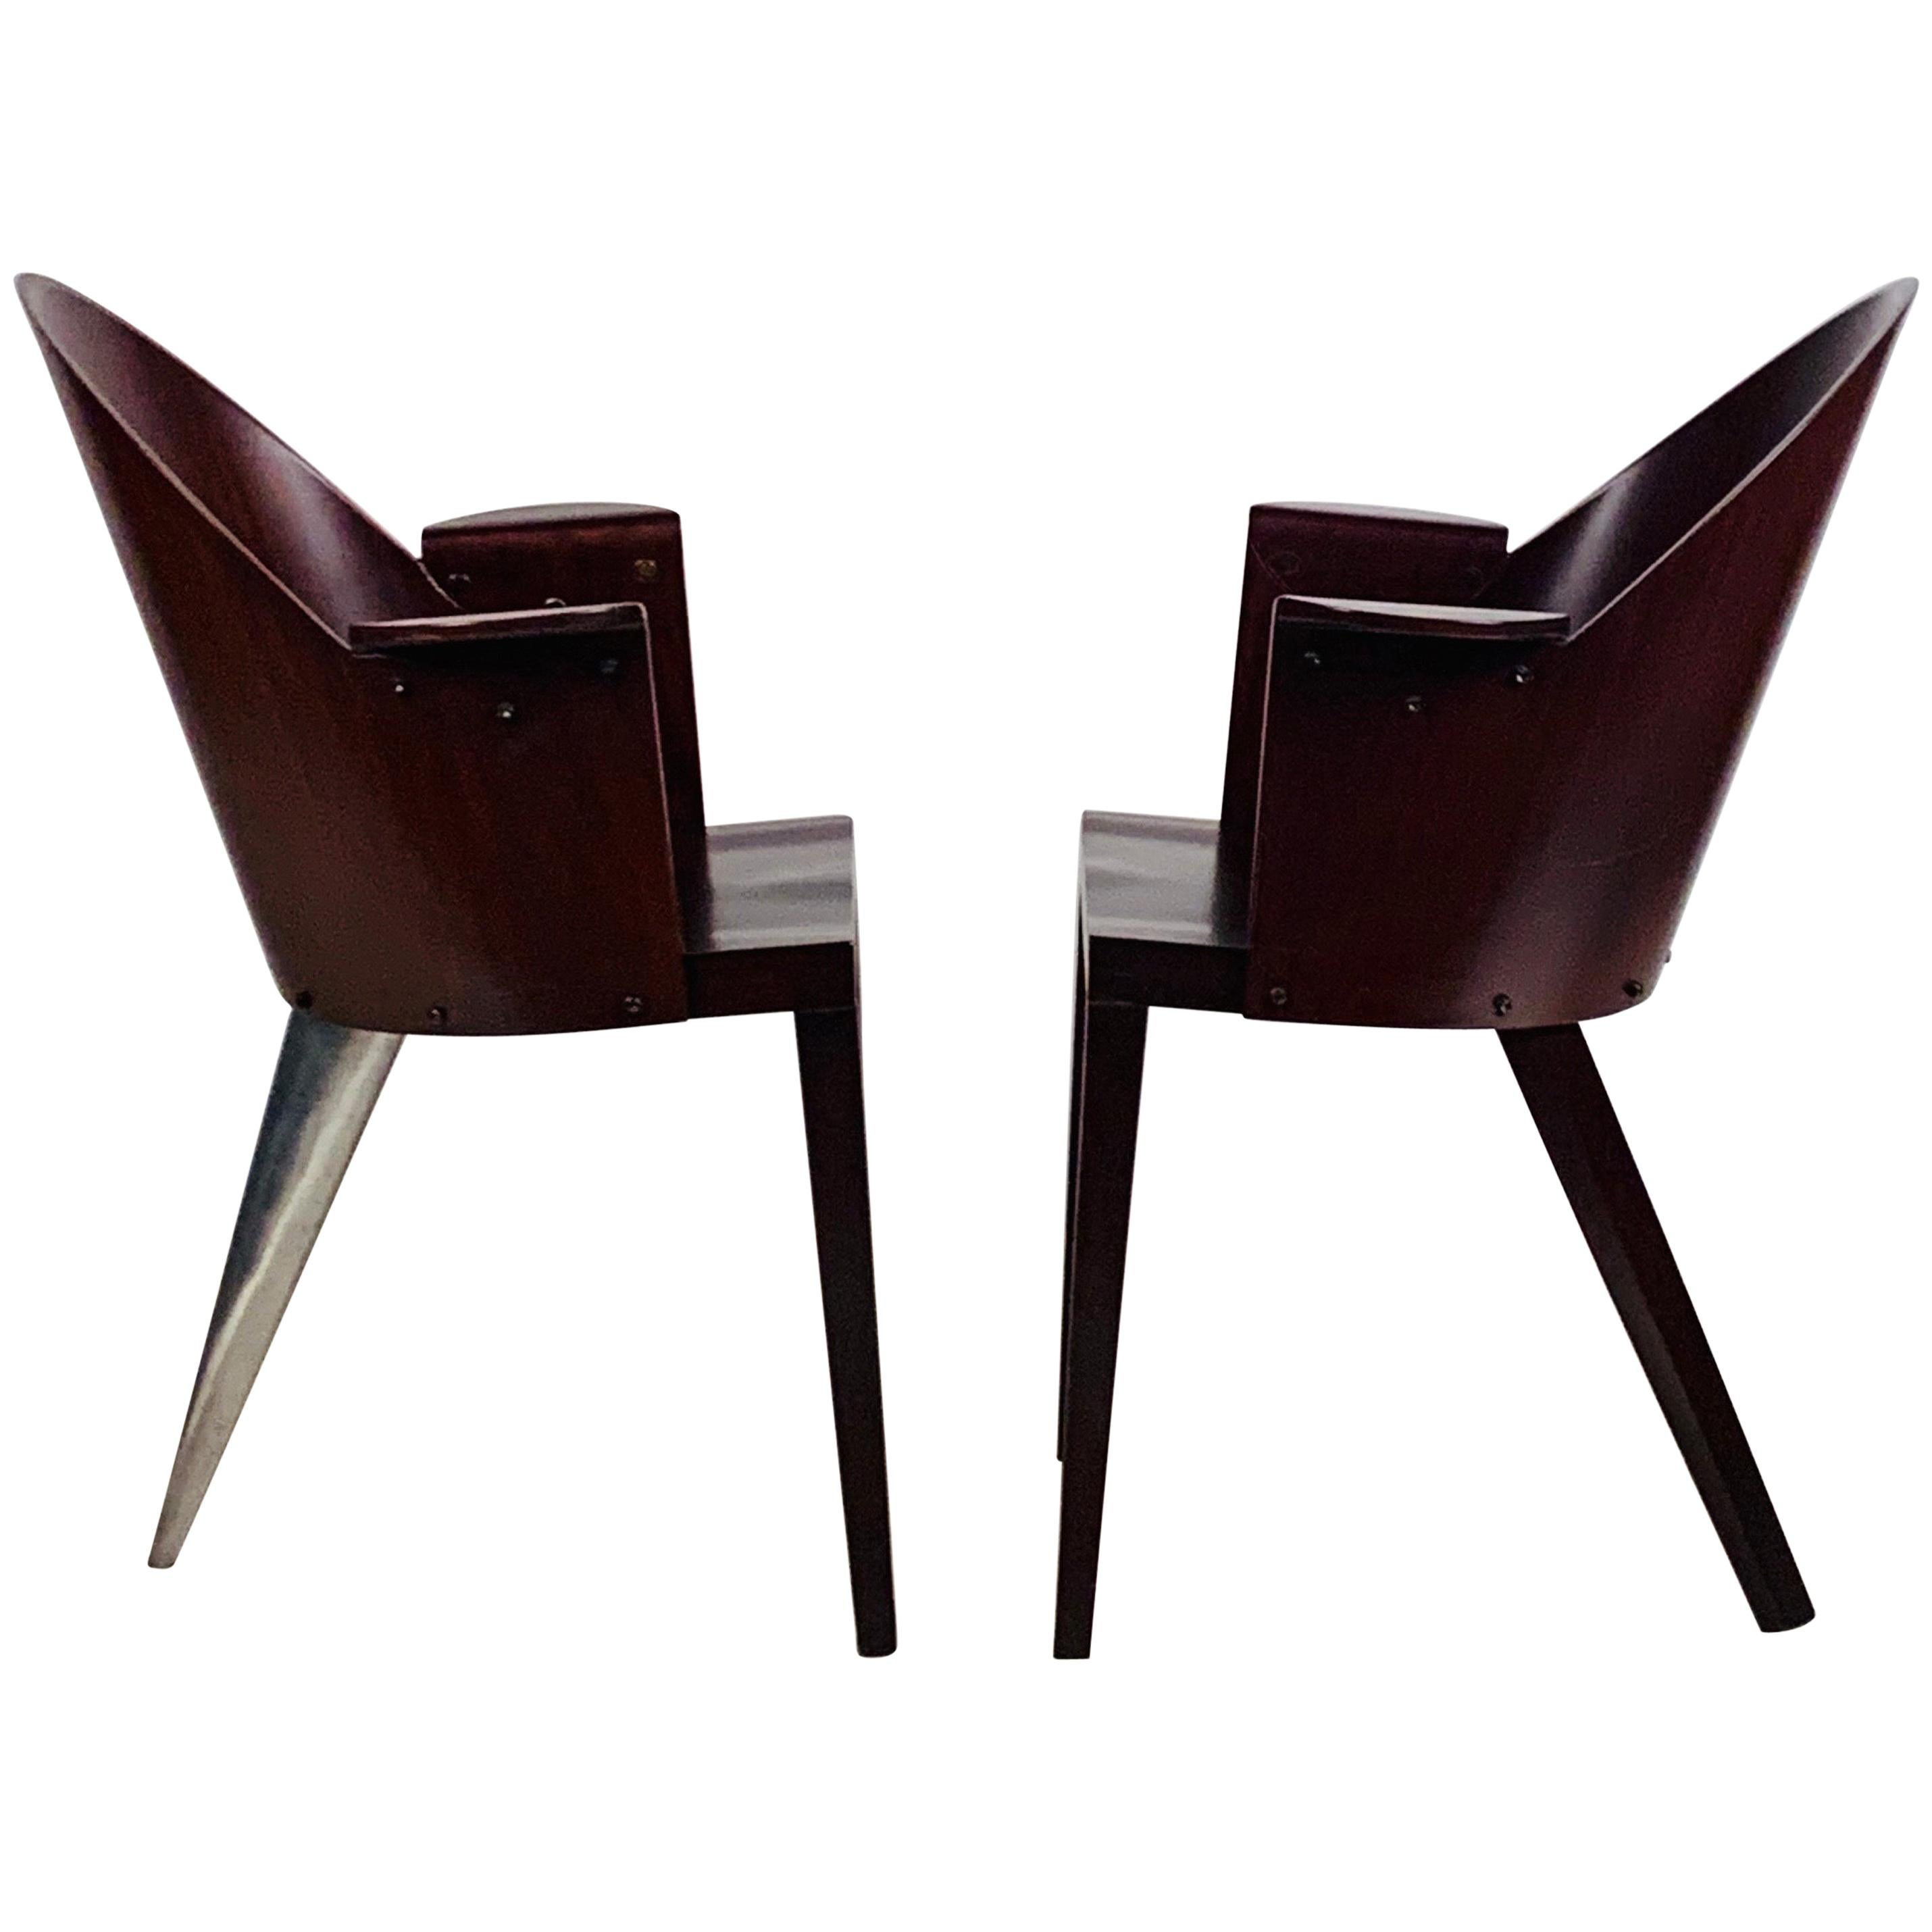 Rare Pair of Philippe Starck Armchairs from the Royalton Hotel, NYC